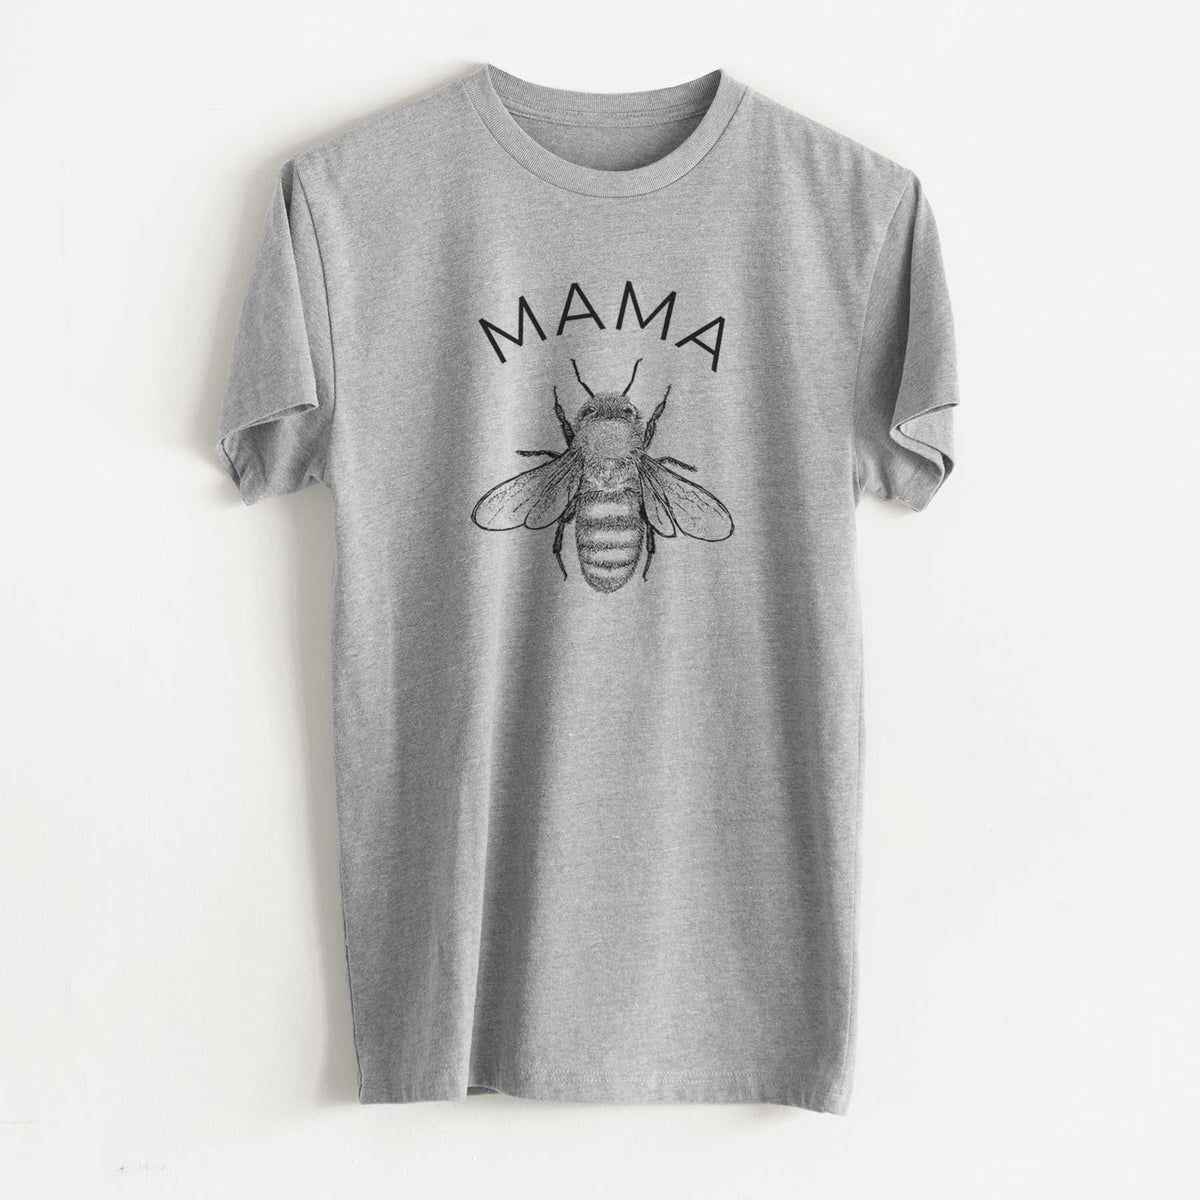 Mama Bee - Unisex Recycled Eco Tee  - CLOSEOUT - FINAL SALE